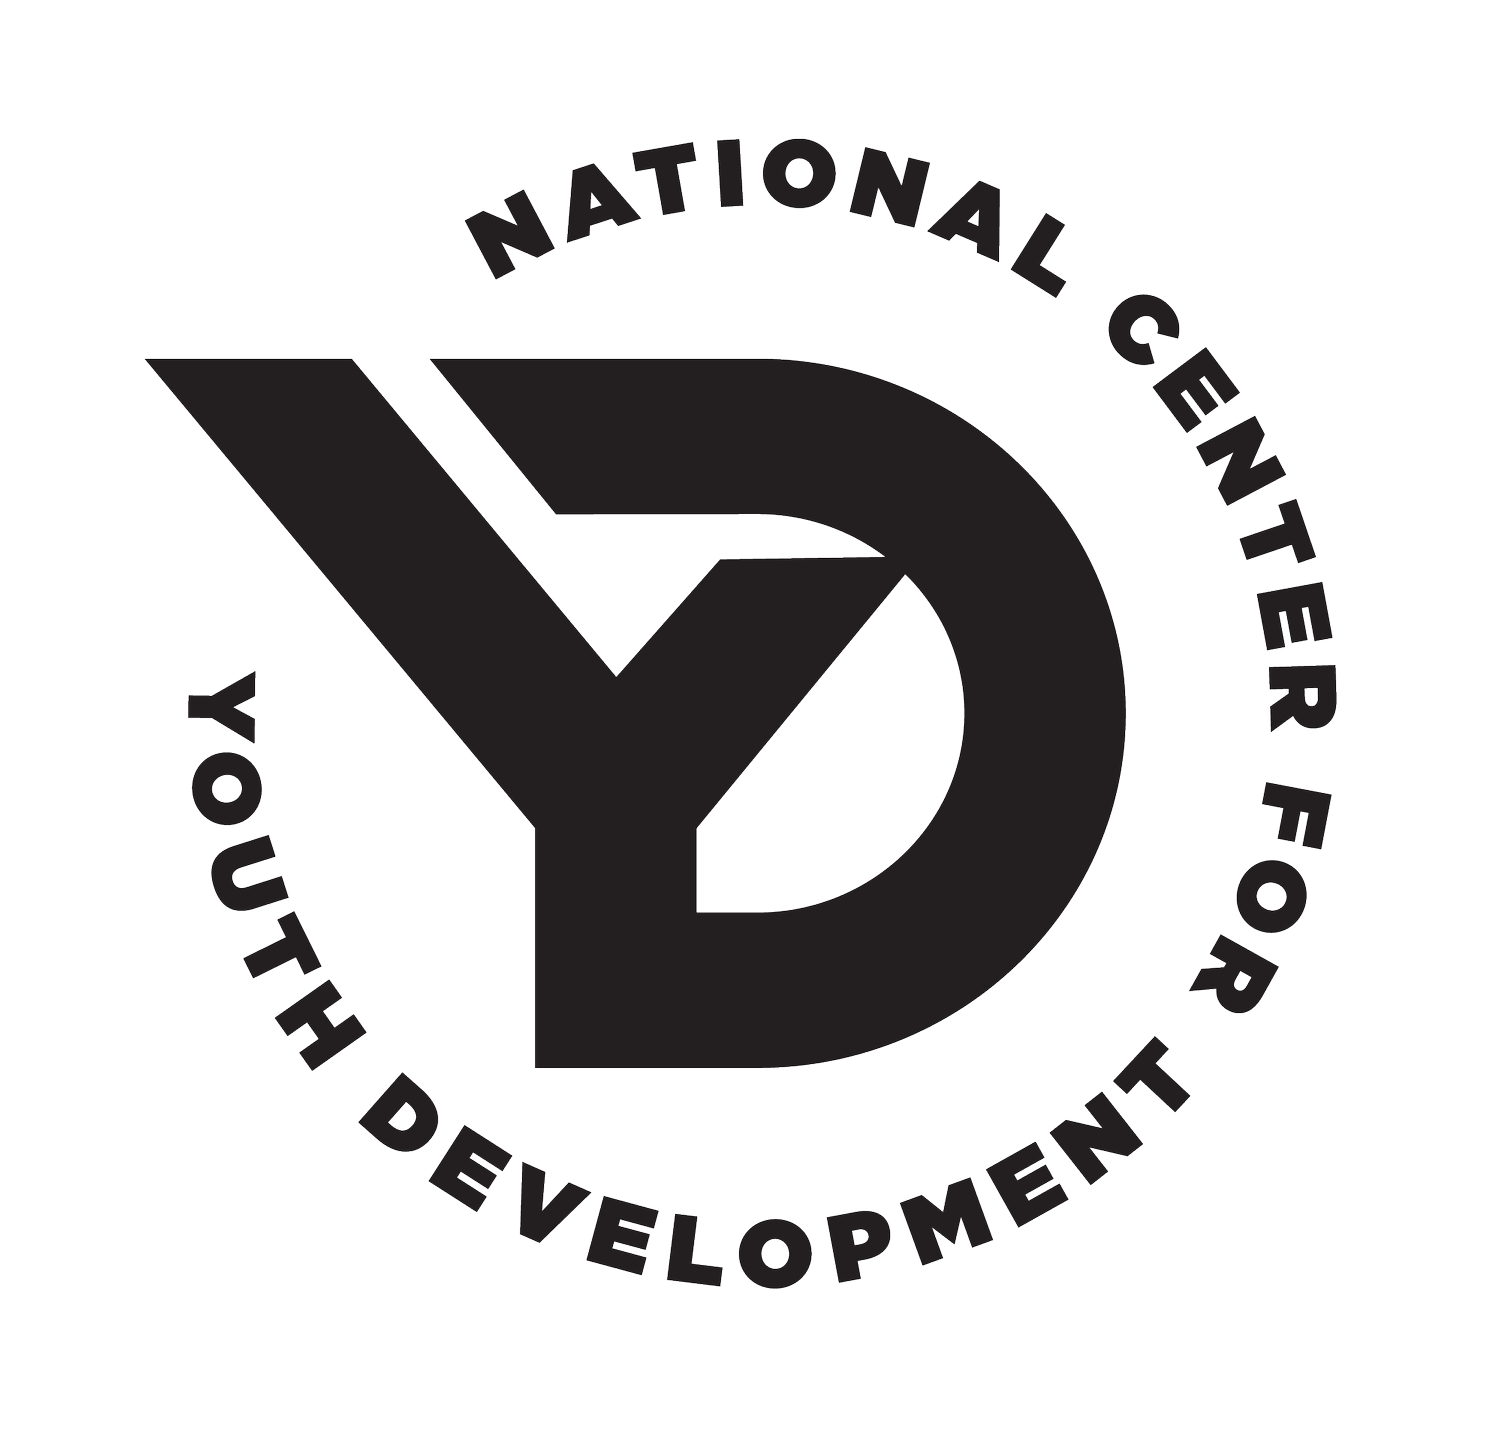 National Center for Youth Development